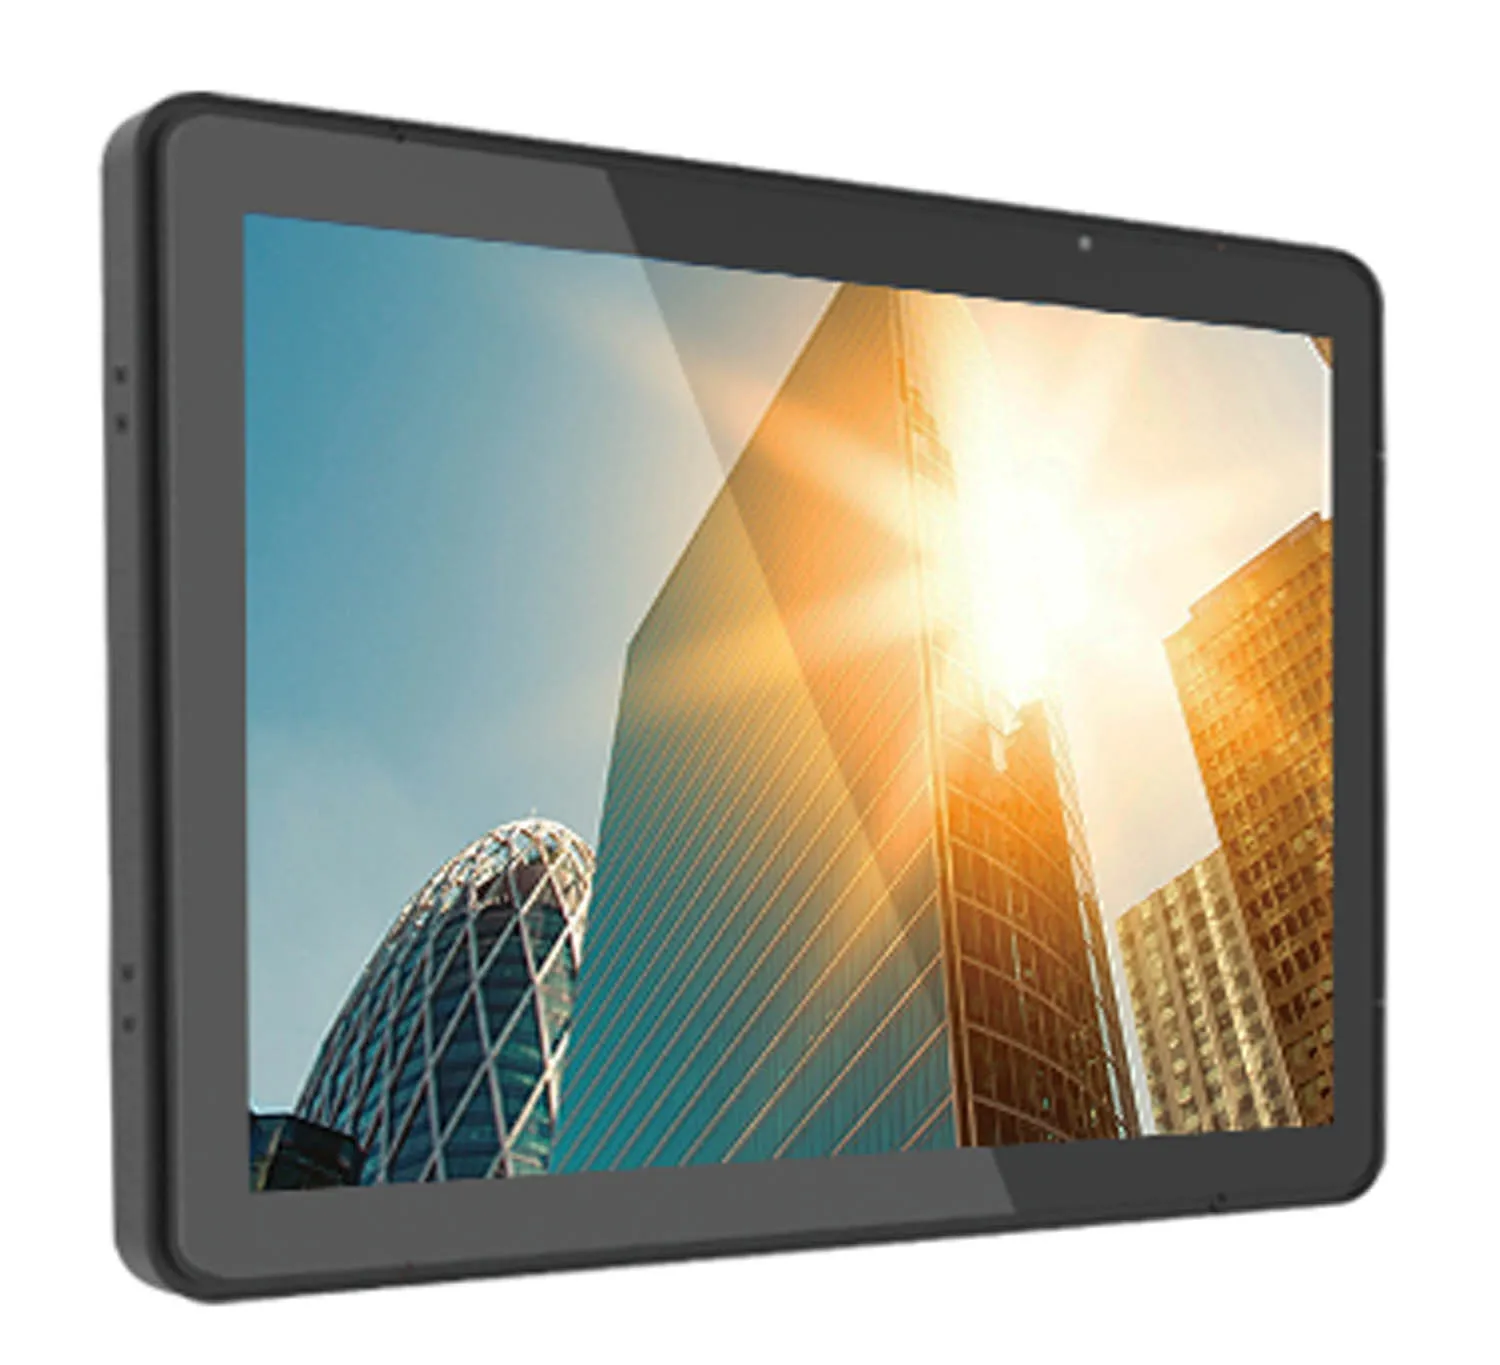 INDUSTRIAL OPEN FRAME HIGH BRIGHT TOUCH MONITOR KEETOUCH 15,6’’ KT-156-CHWSGF1